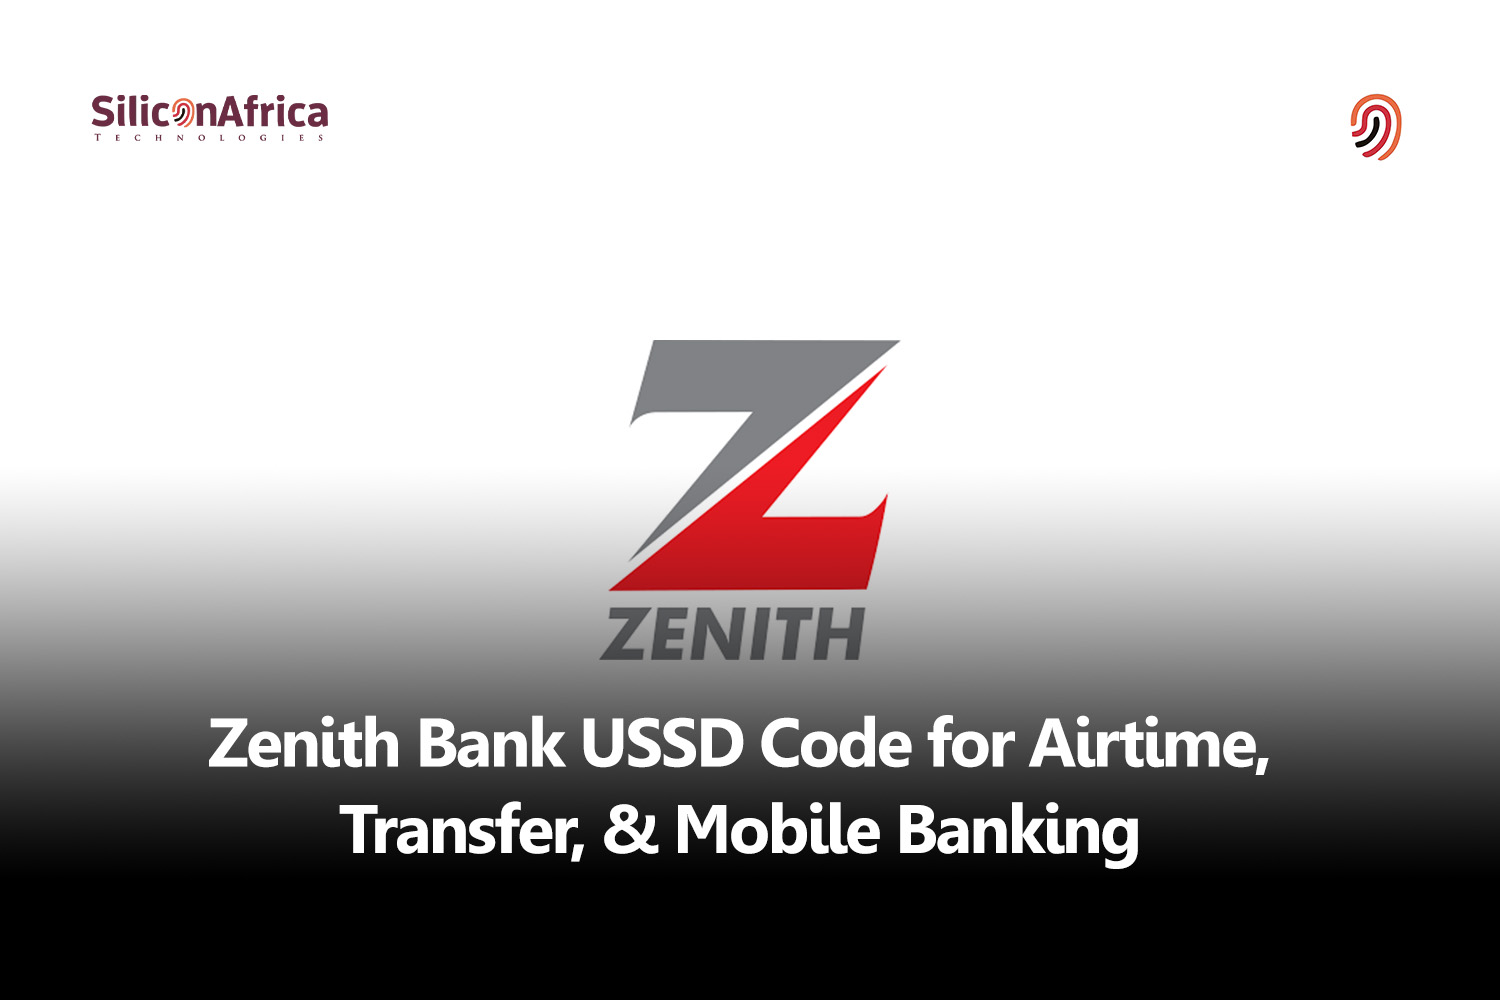 Zenith Bank USSD Code for Airtime, Transfer, & Mobile Banking